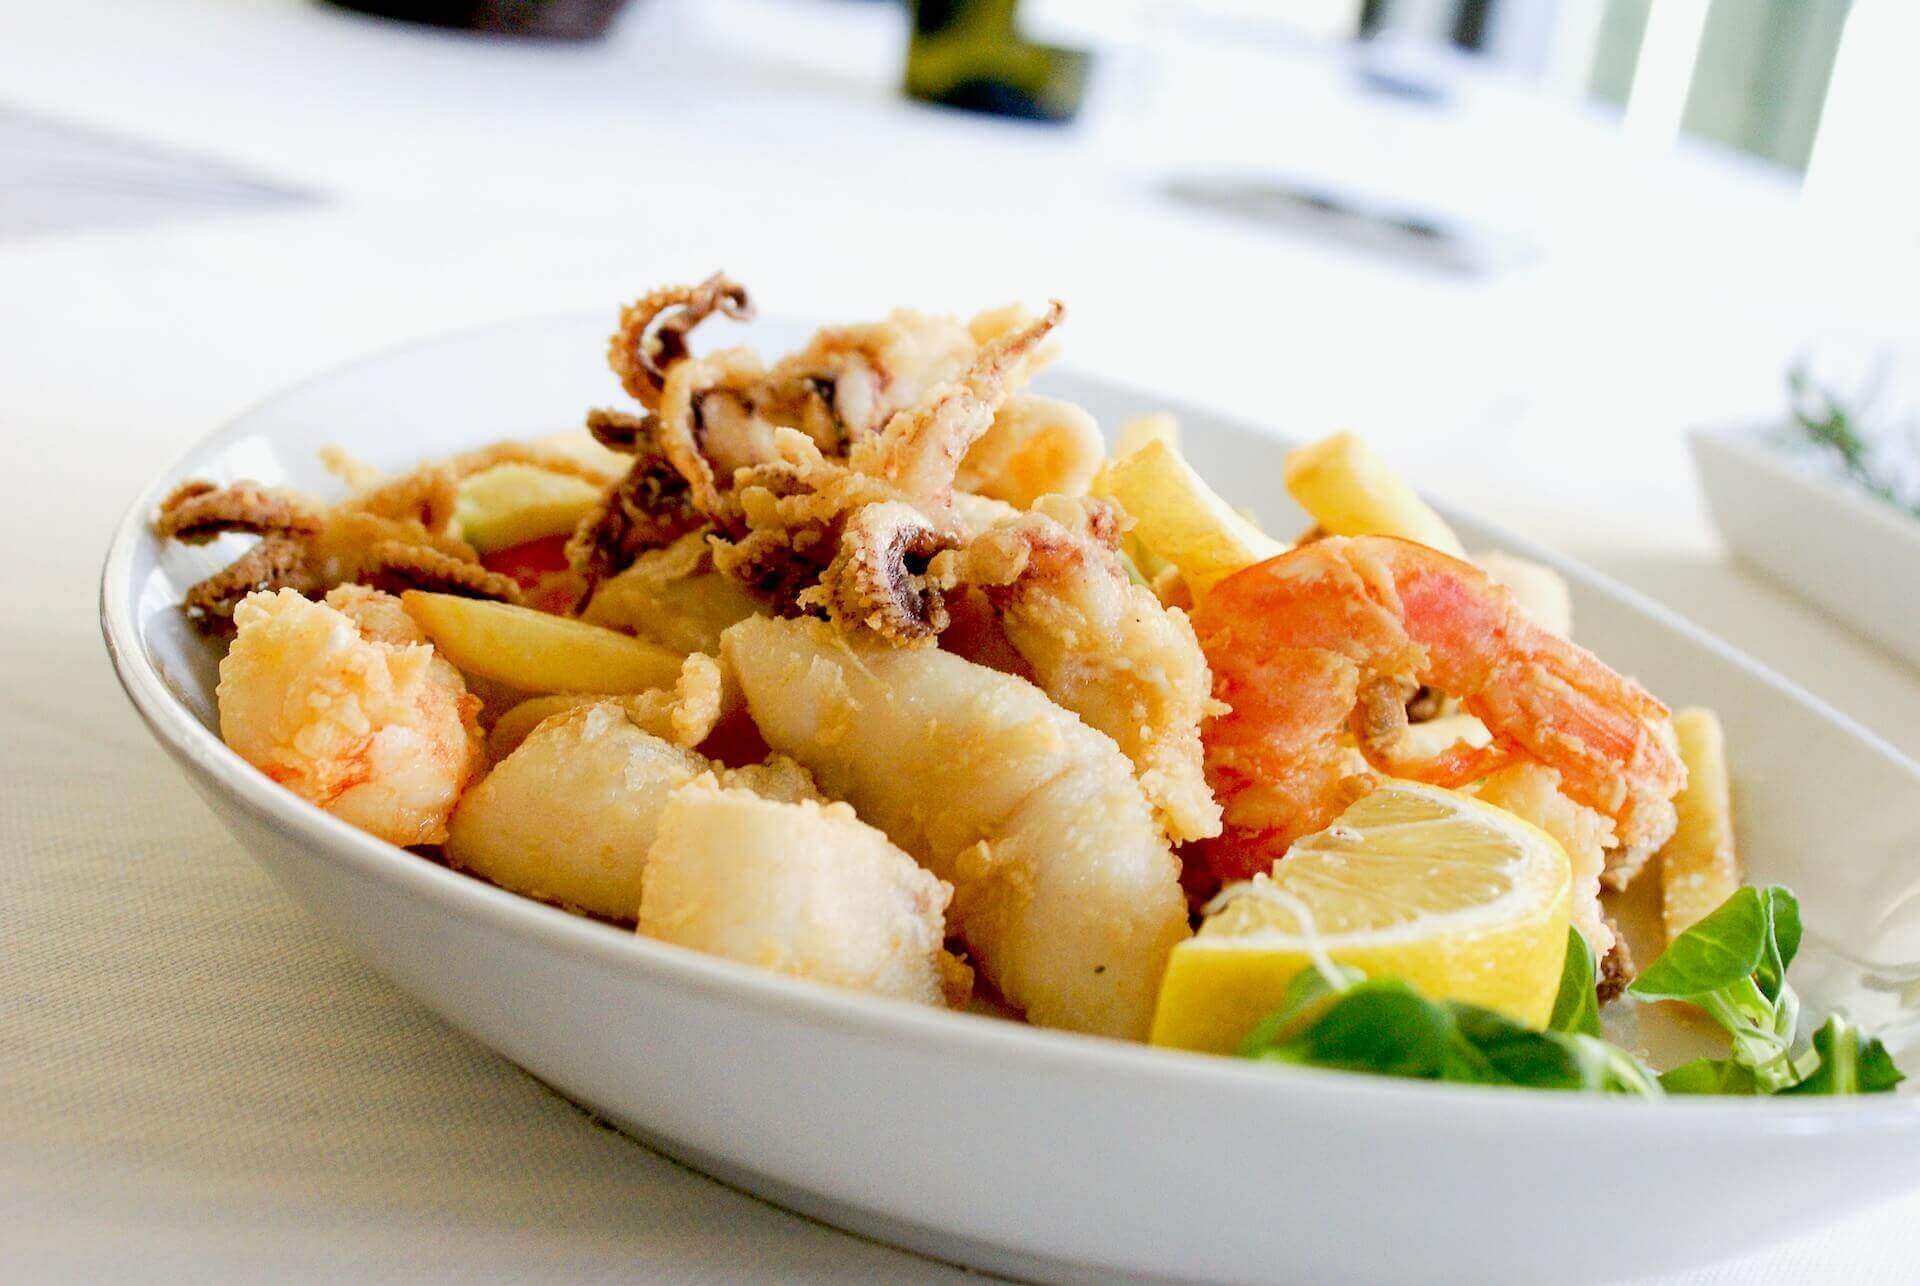 Fried shrimp and squid with pieces of lemon